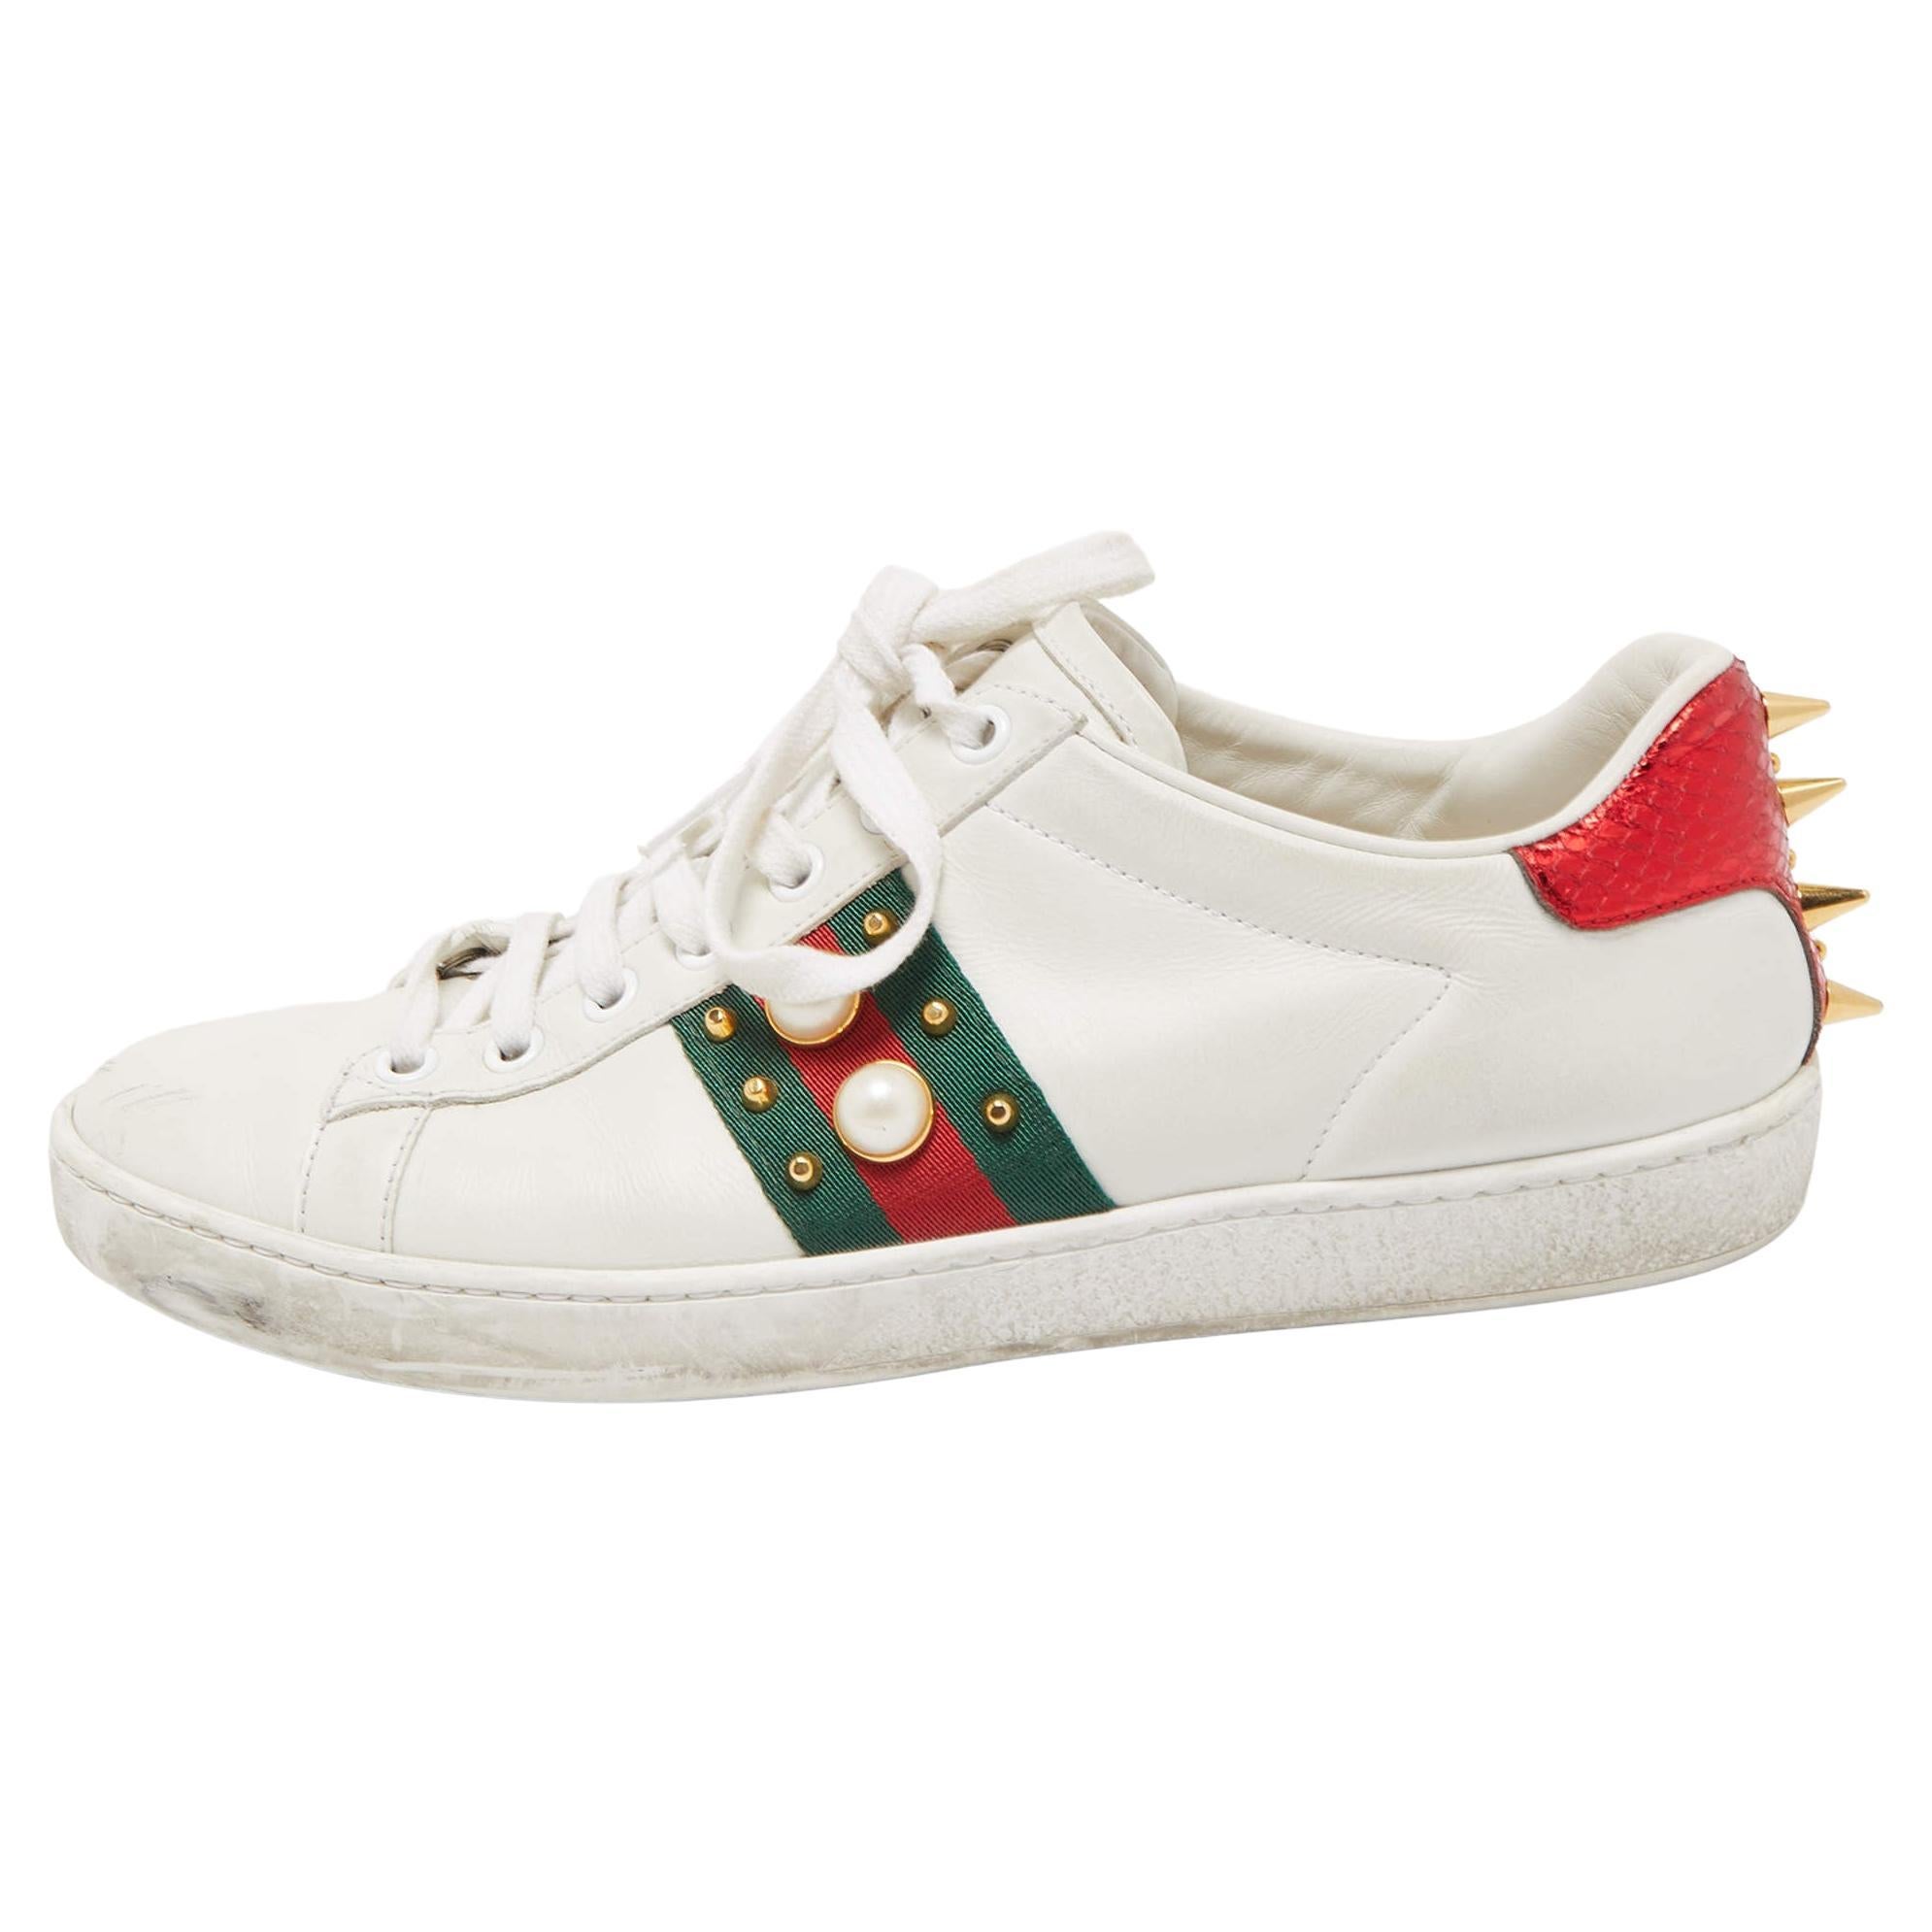 Gucci White Leather Faux Pearl Embellished Ace Sneakers Size 37.5